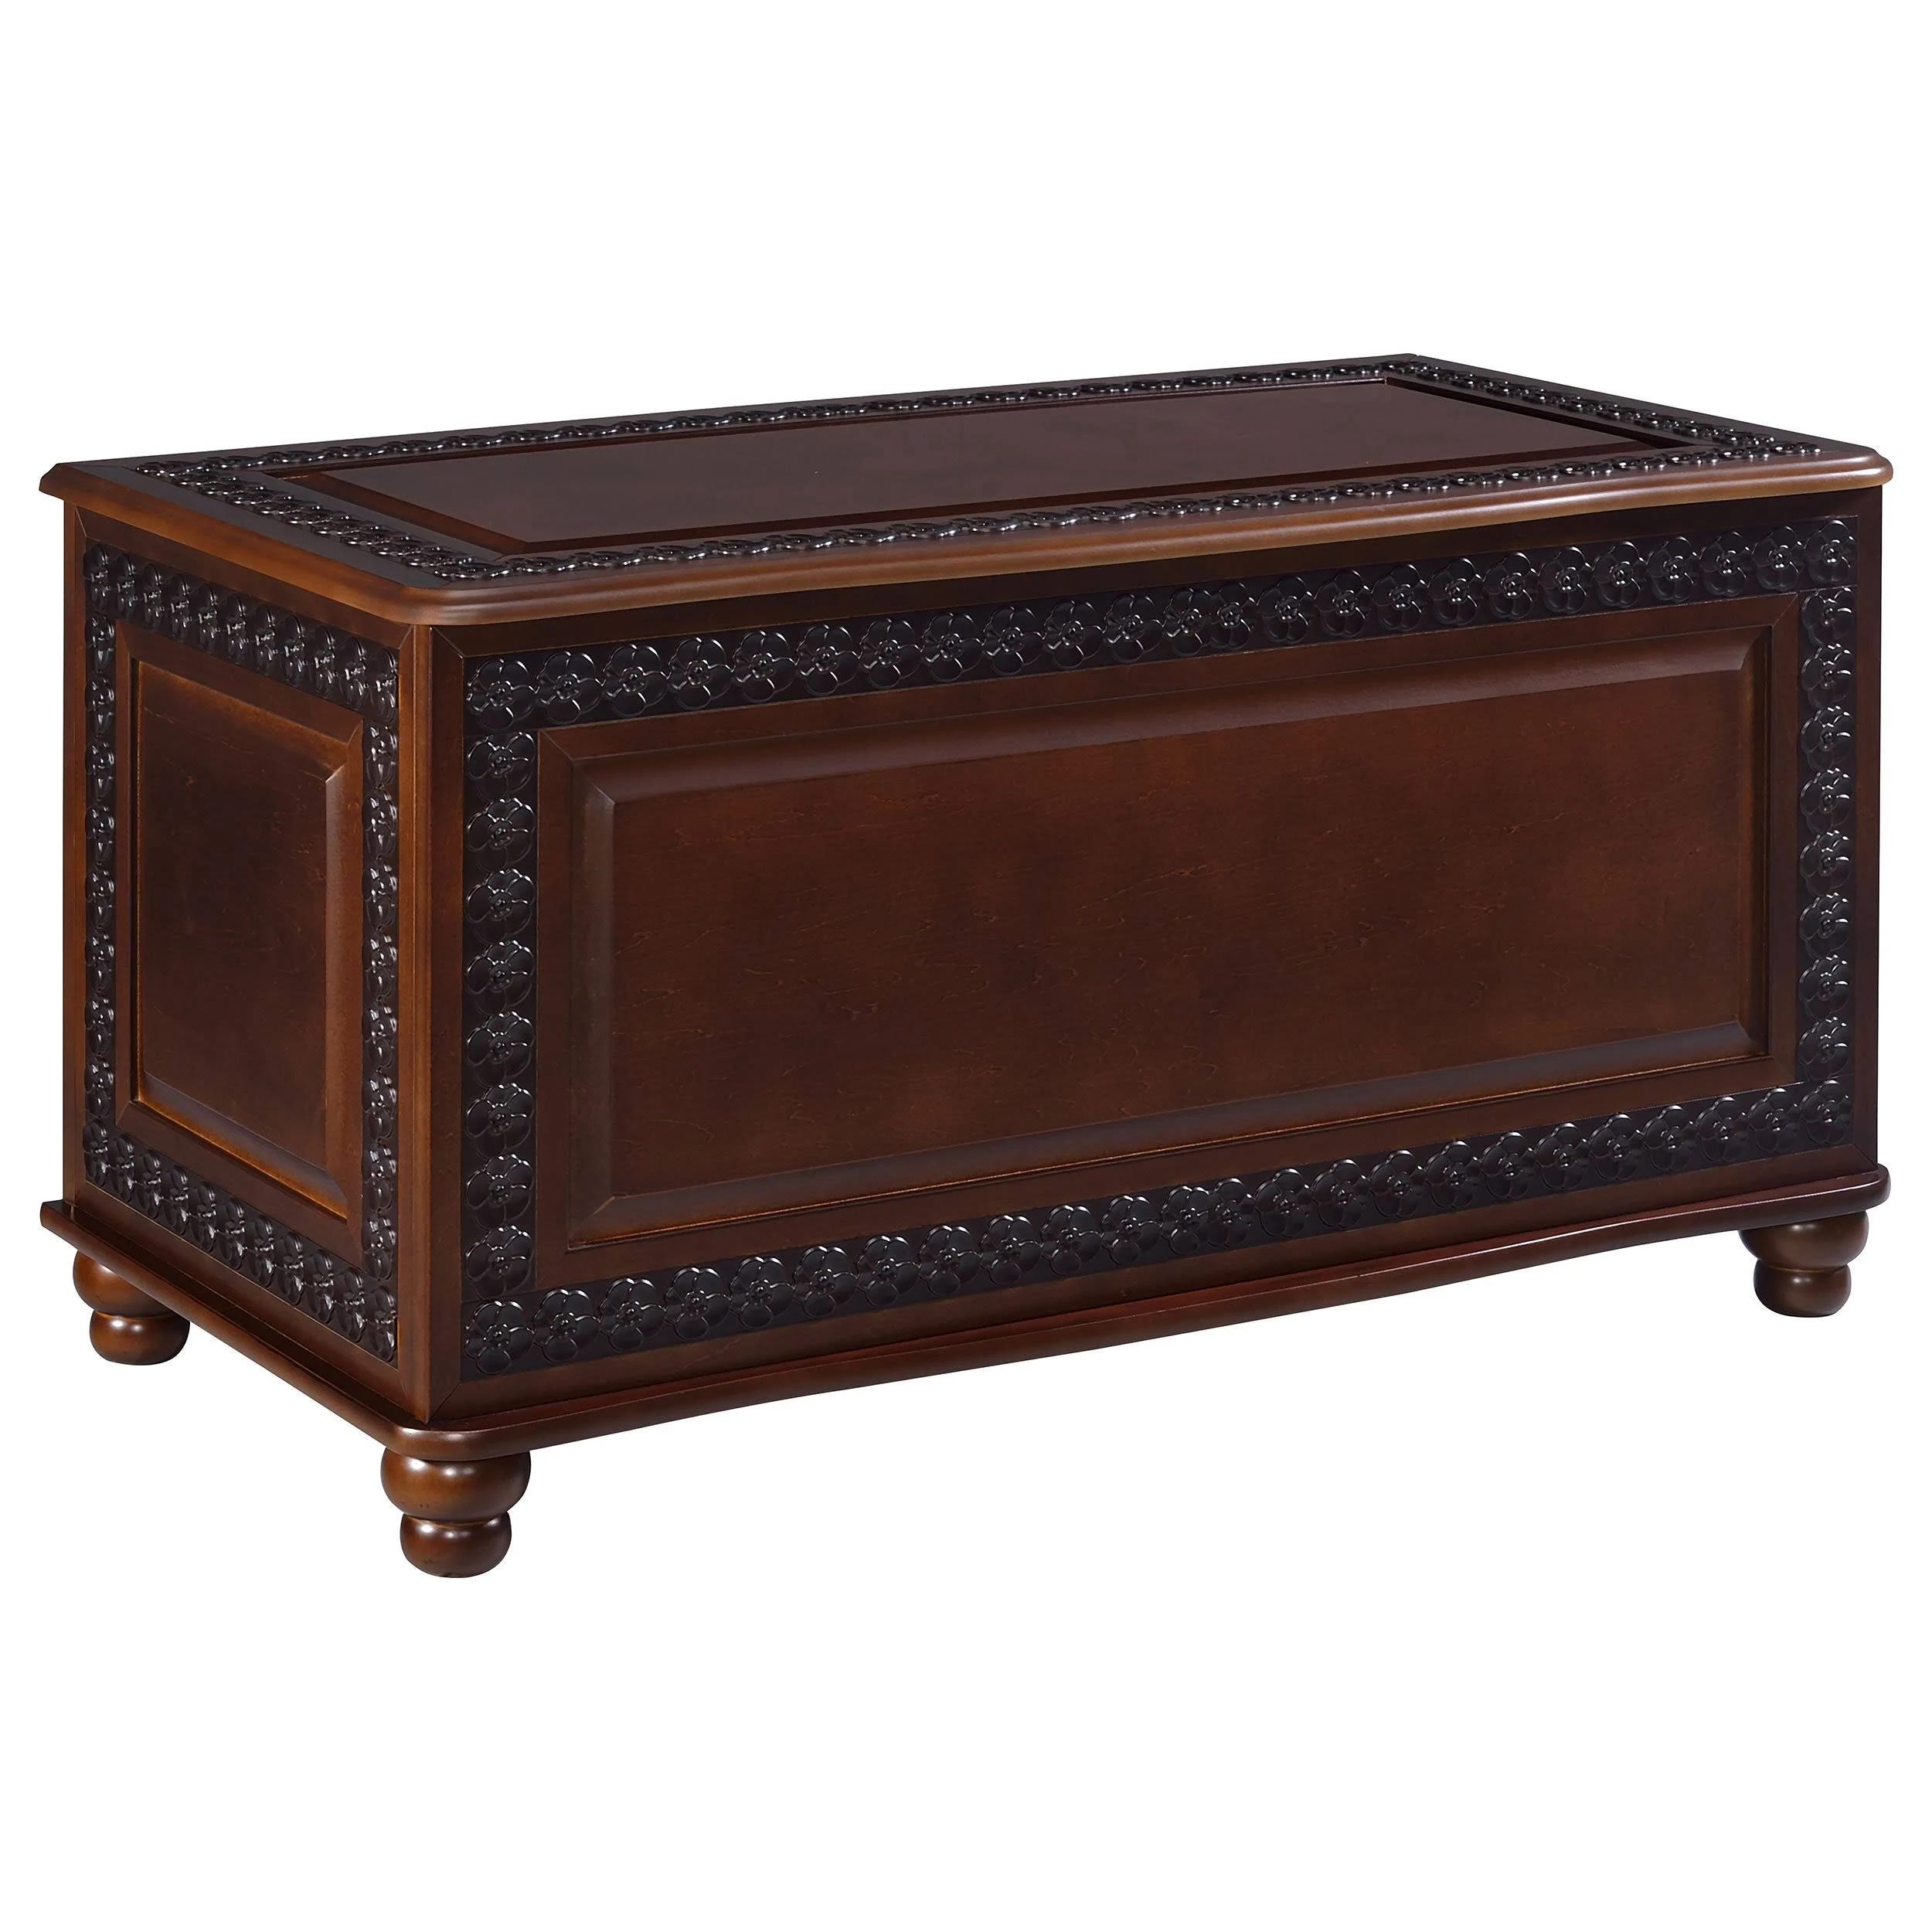 Stylish Cedar Chest for Storing and Displaying Treasured Items | Image